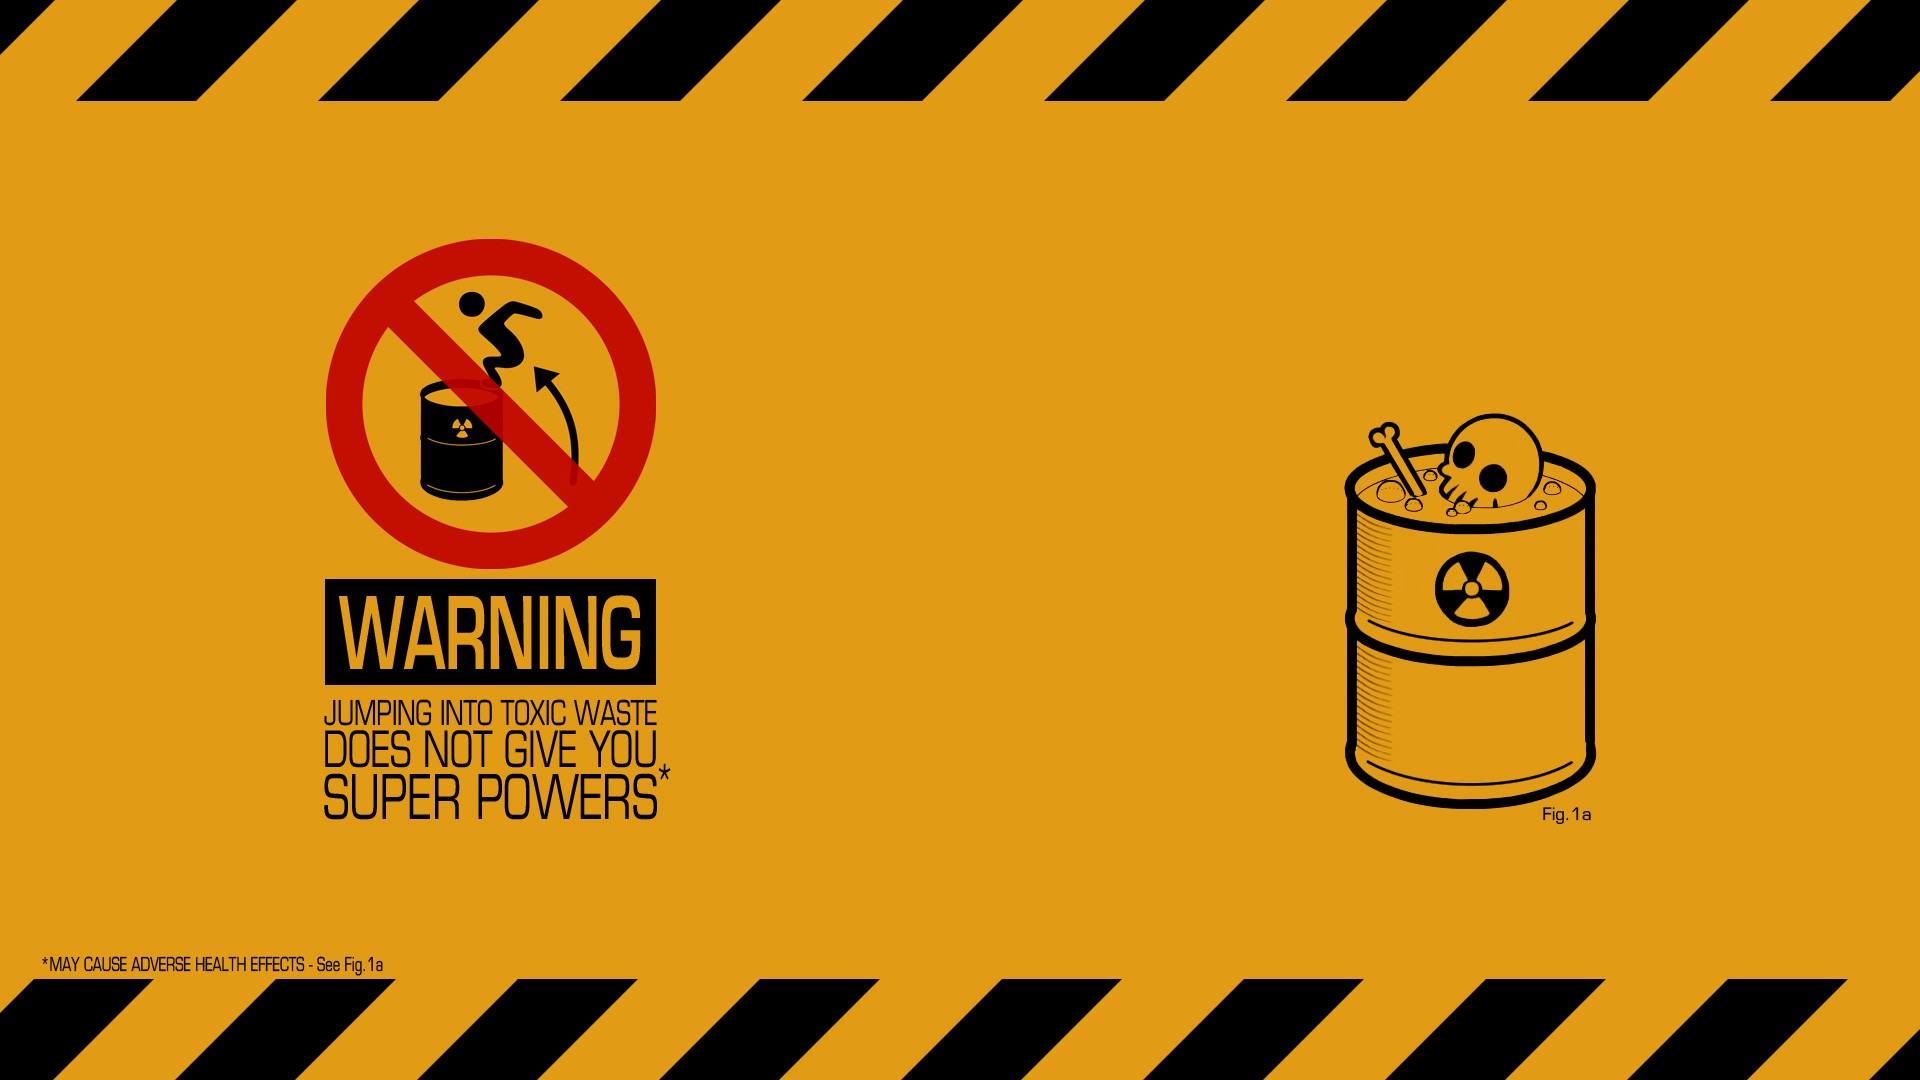 Warning Signs HD Wallpapers - Free Desktop Images and Photos